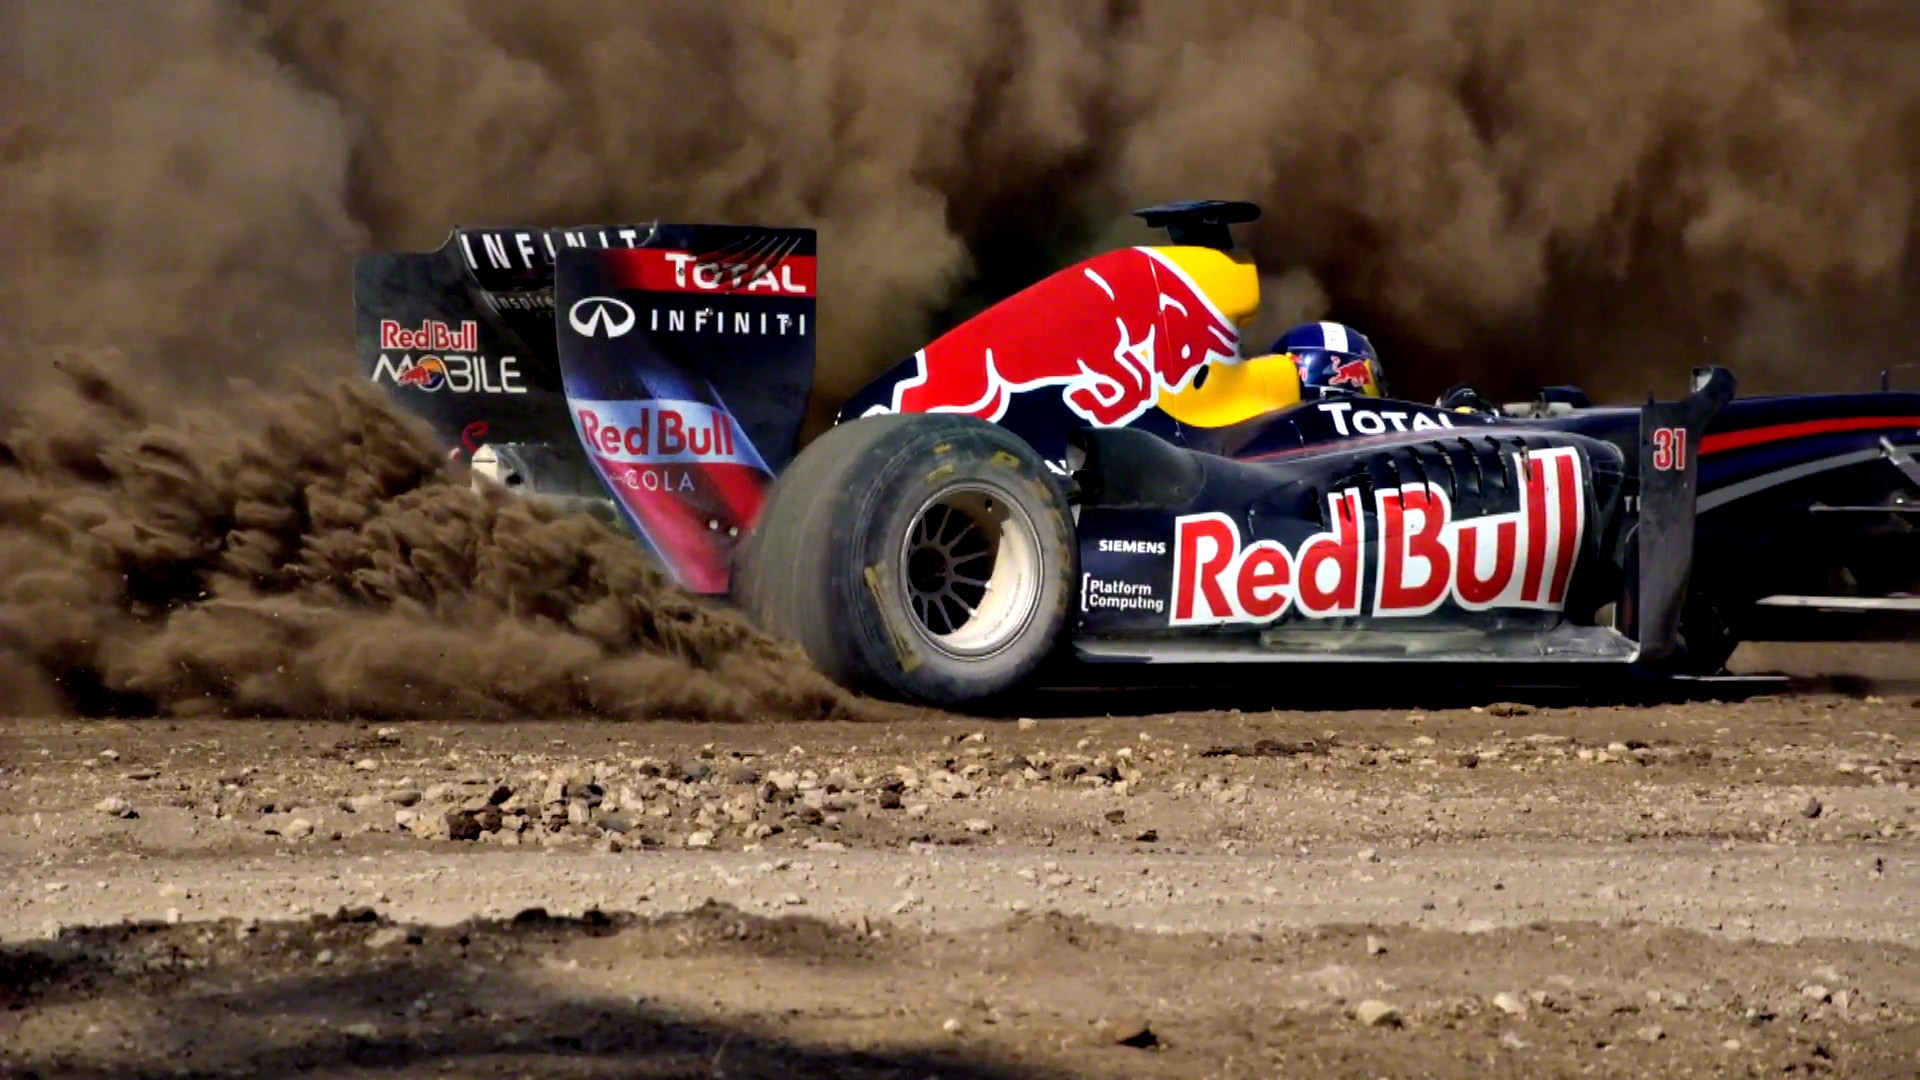 Free Download Formula One Red Bull Red Bull Racing David Coulthard Hd Wallpaperjpg 1920x1080 For Your Desktop Mobile Tablet Explore 72 Red Bull Racing Wallpaper Red Bull Wallpaper Red